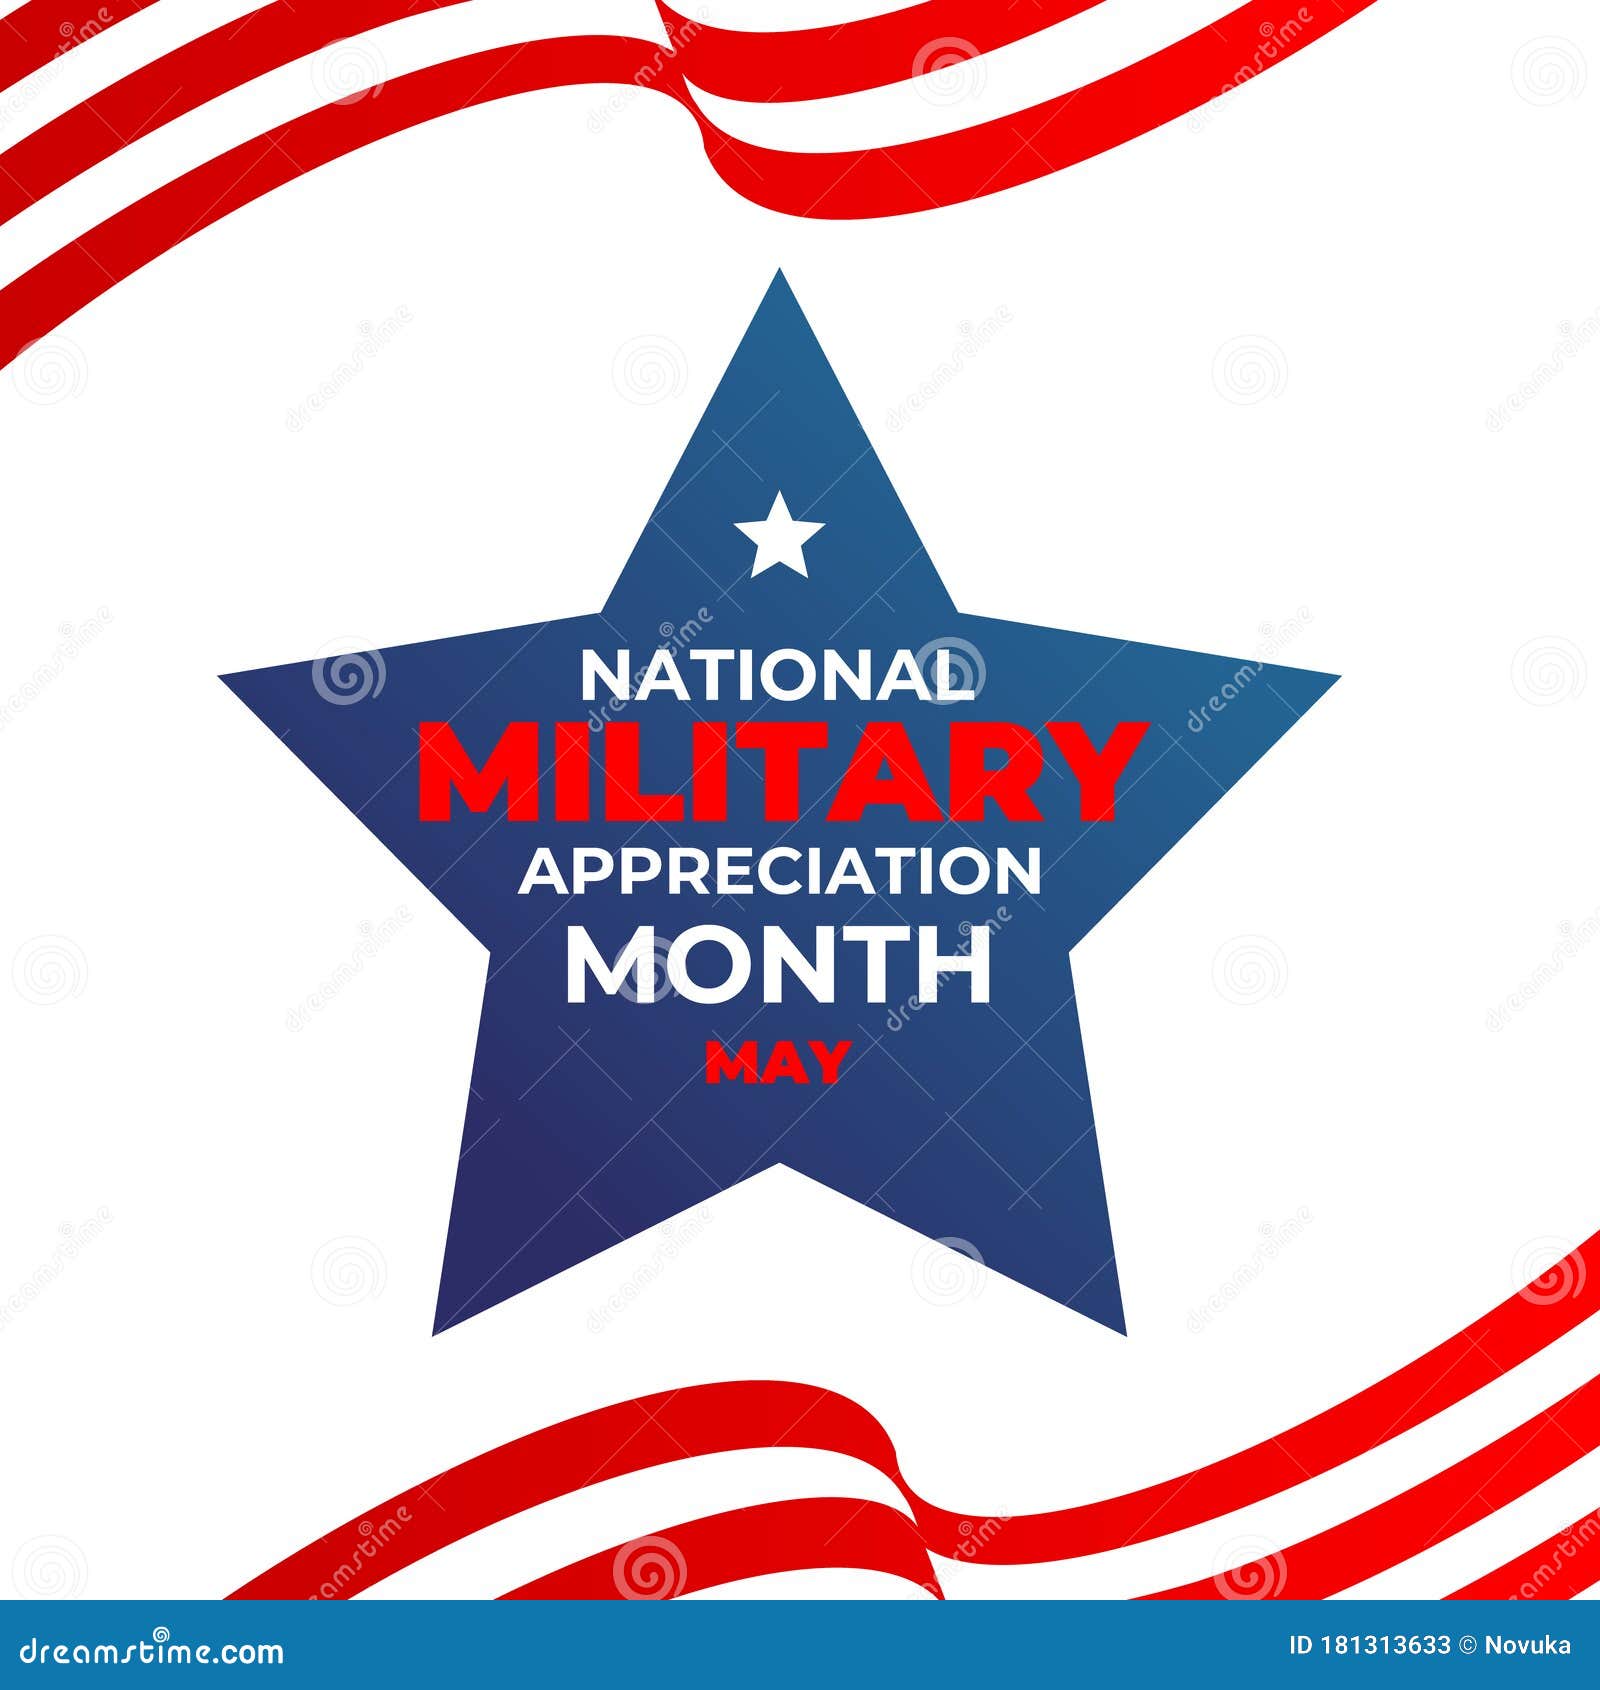 national military appreciation month.  square insta banner, poster, card for social networks, media with the text: national